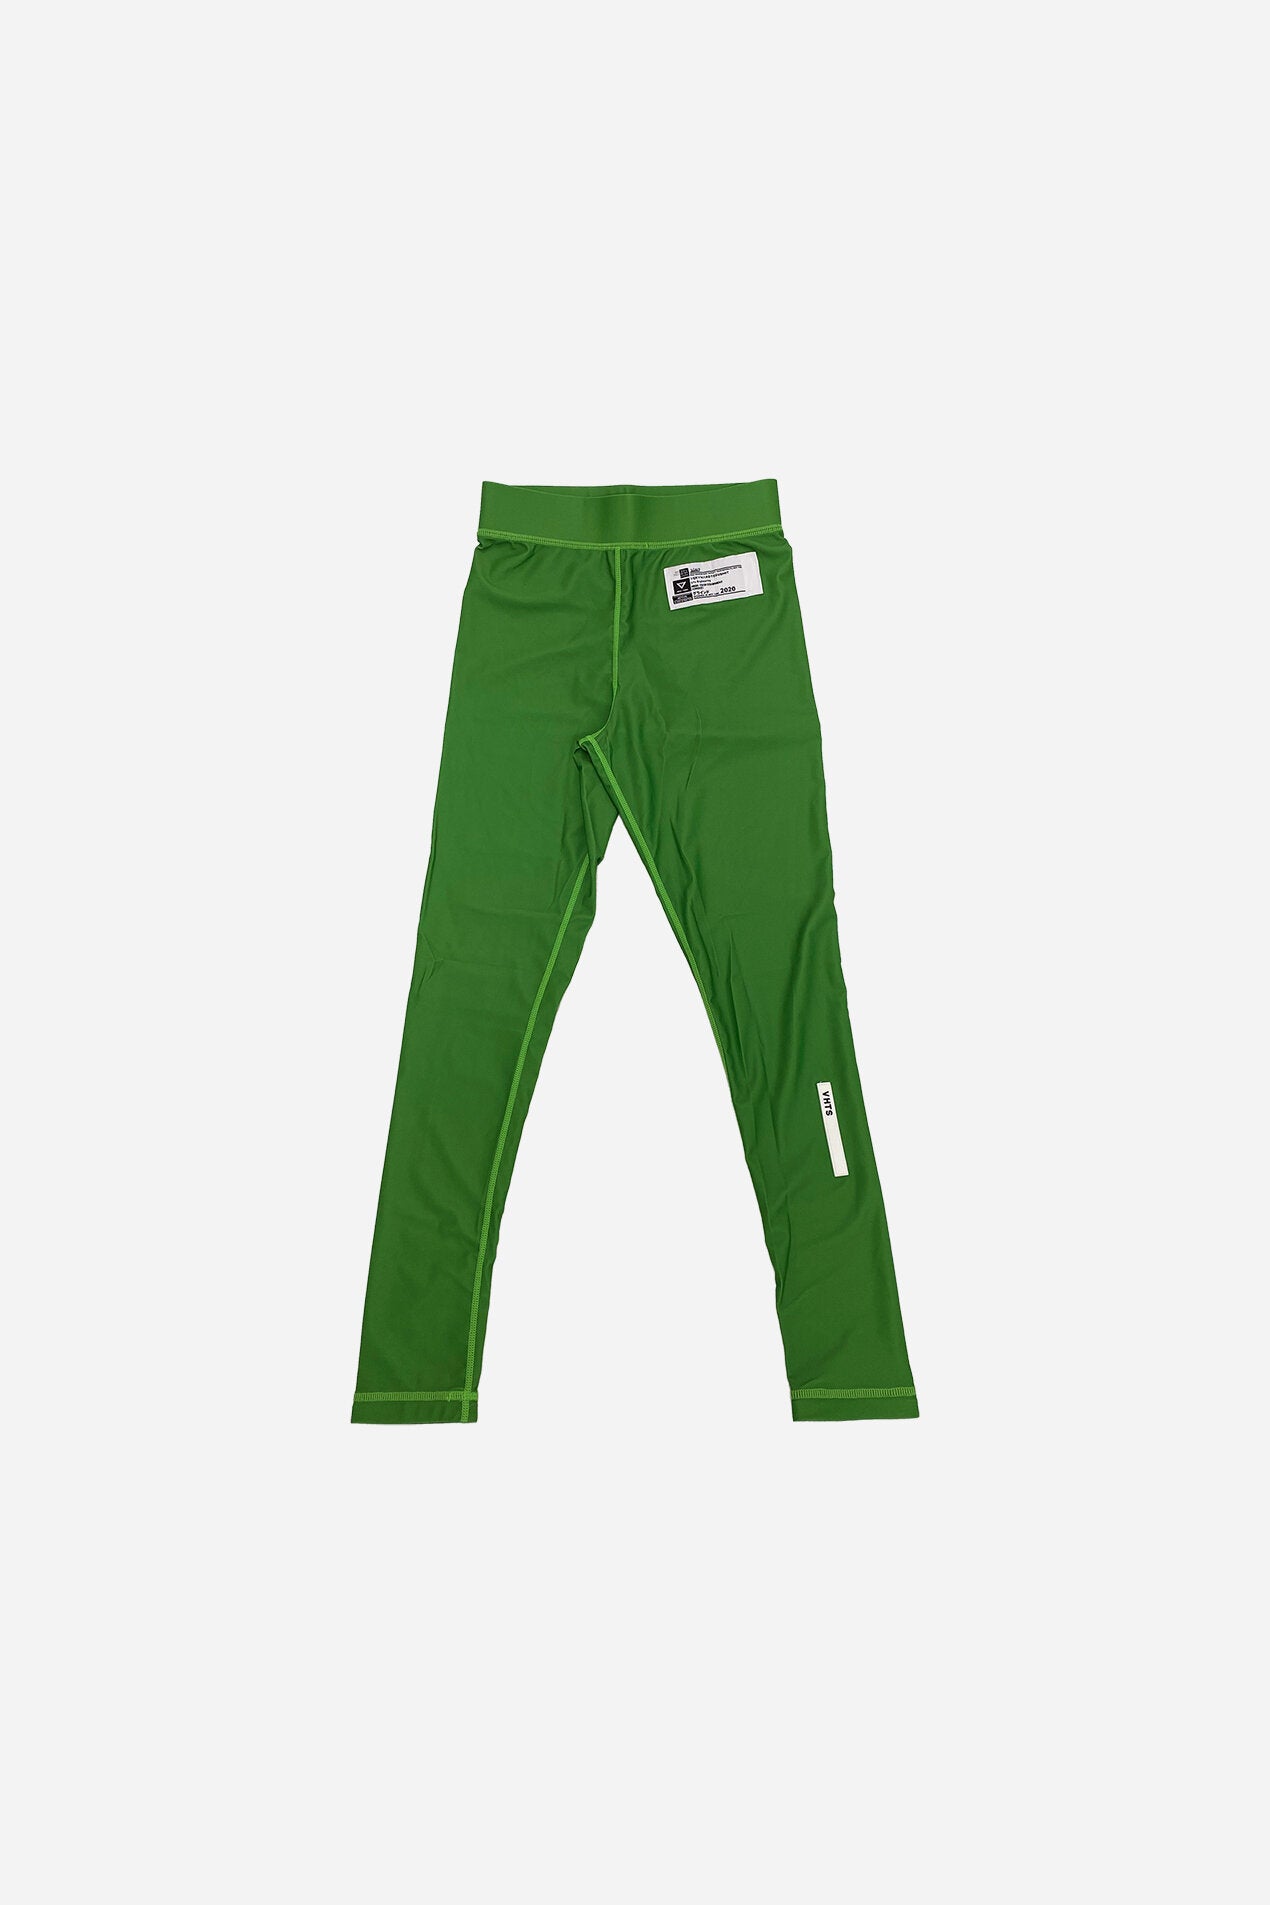 2020 Spats Green 220 GSM Polyester 80% x lycra 20%  grip rubber band inside of end sleeve  vhts europe